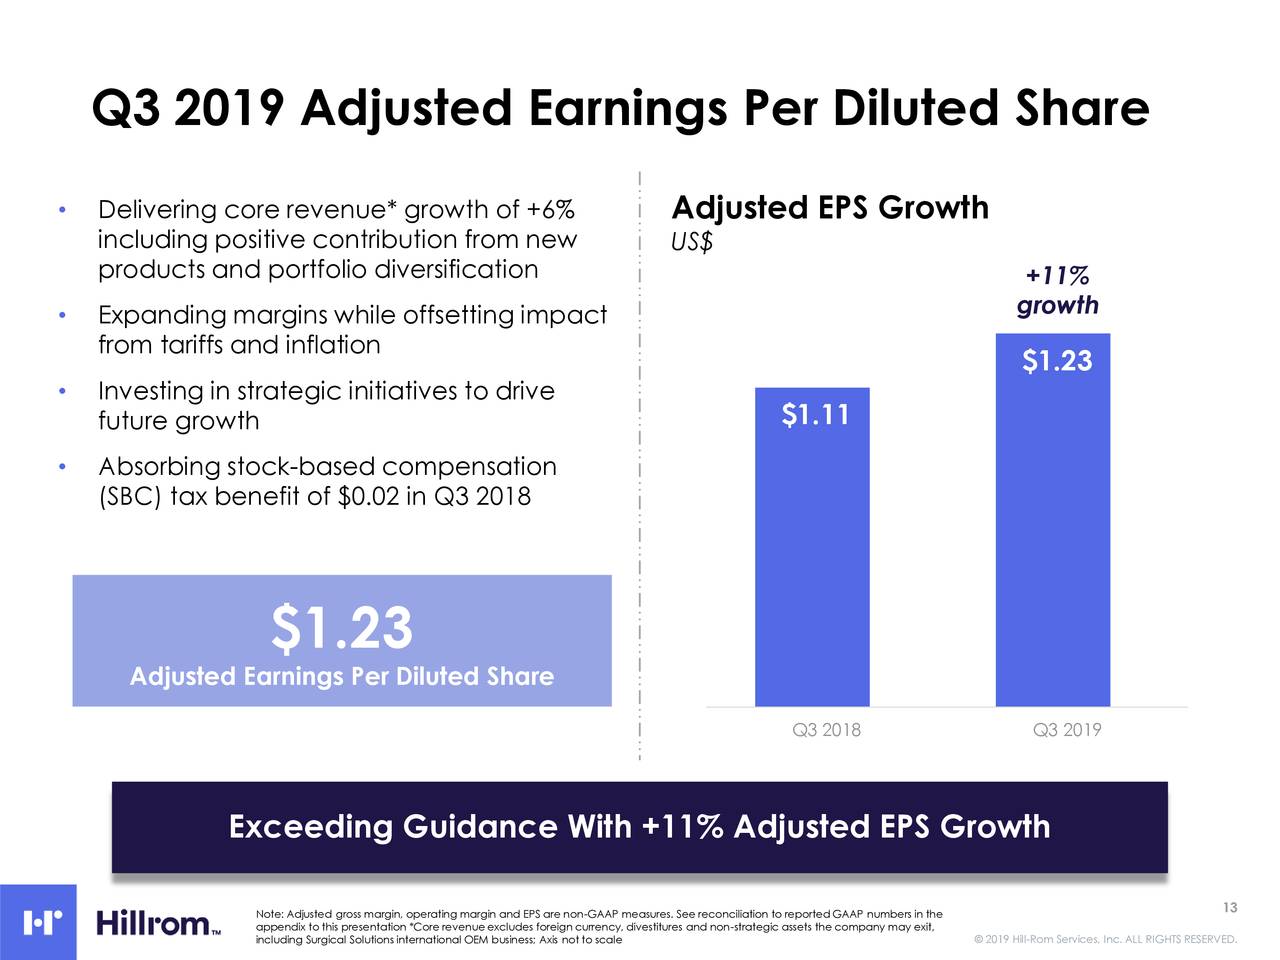 Q3 2019 Adjusted Earnings Per Diluted Share